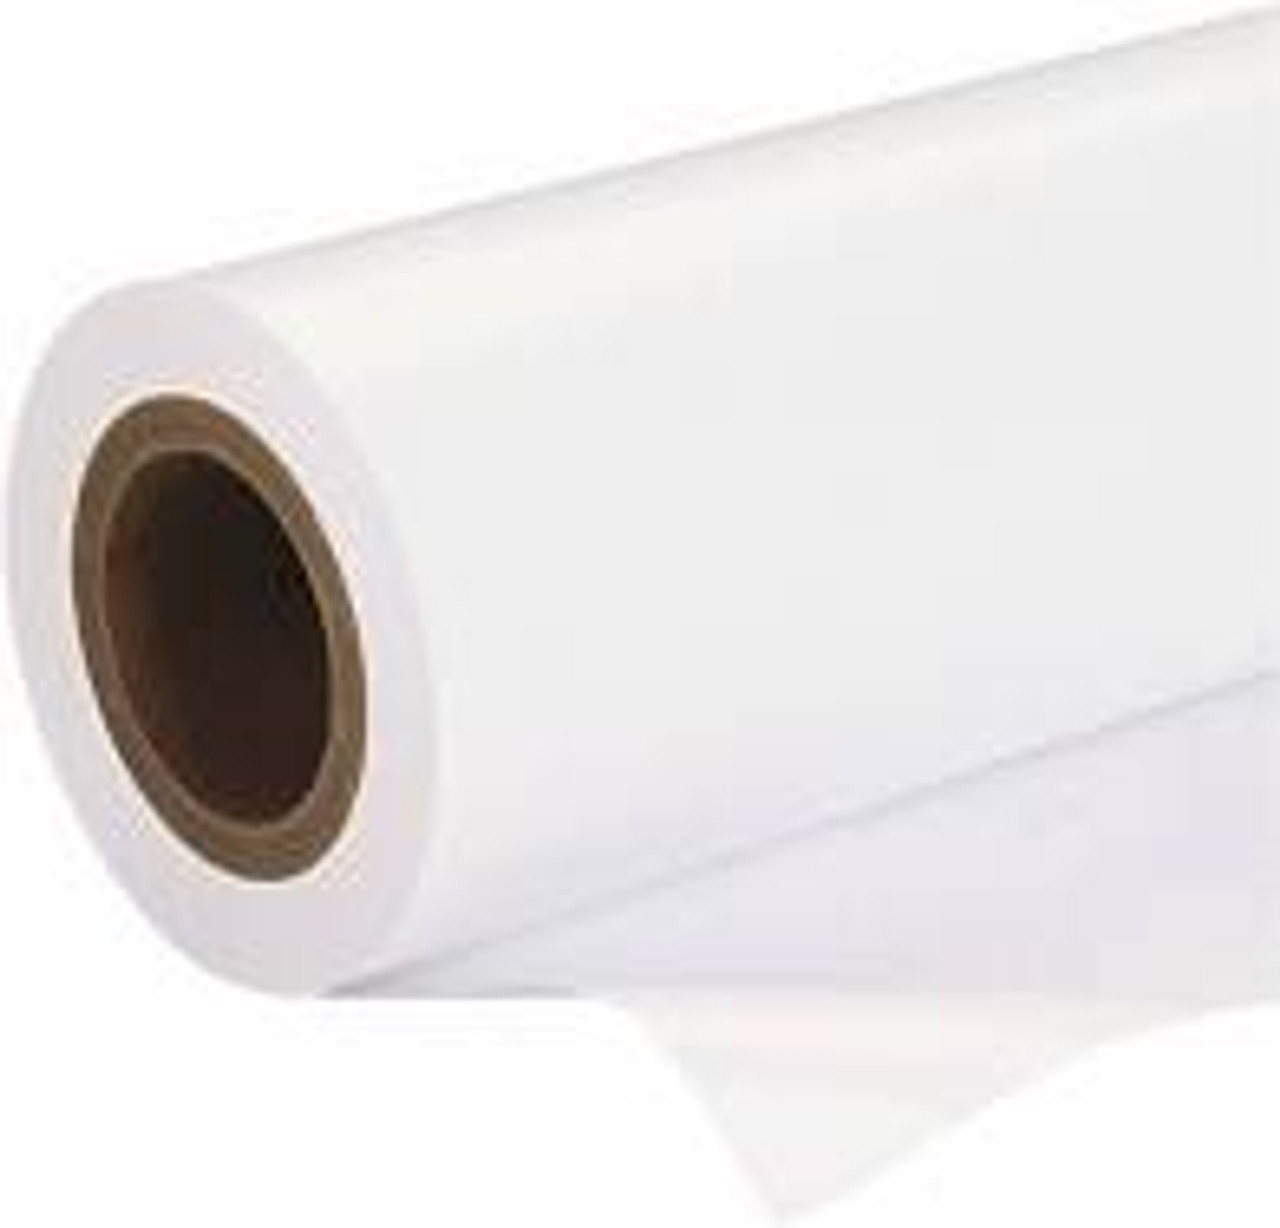 46 lb heavyweight coated bond paper roll - Bright White Paper